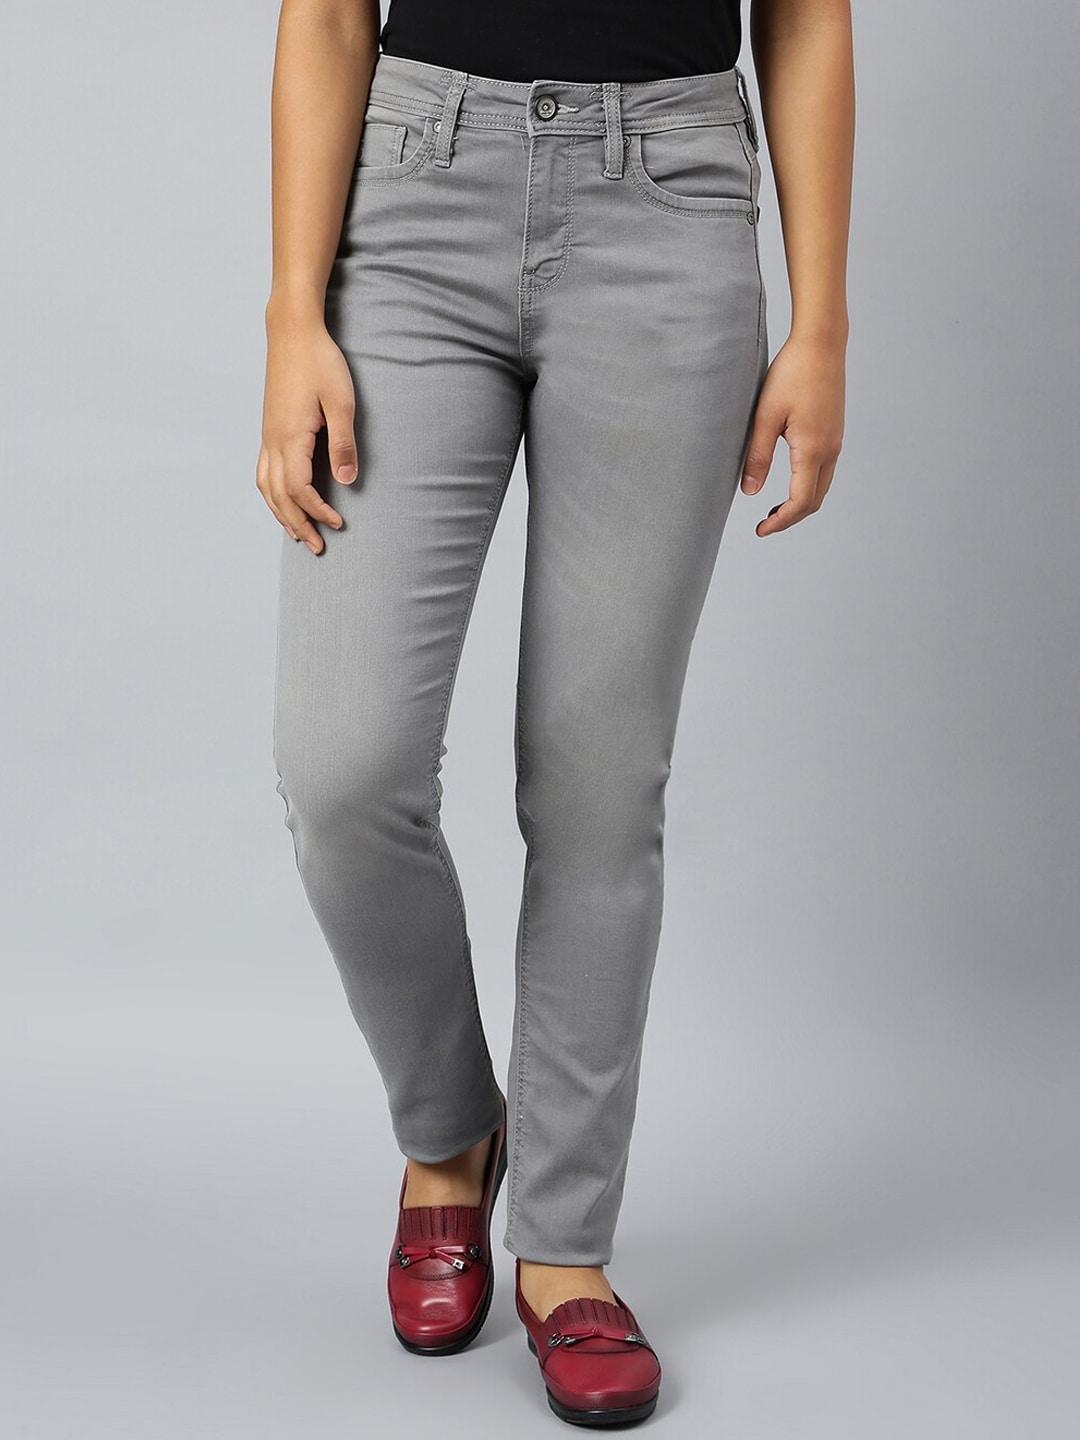 woodland women grey light fade stretchable jeans